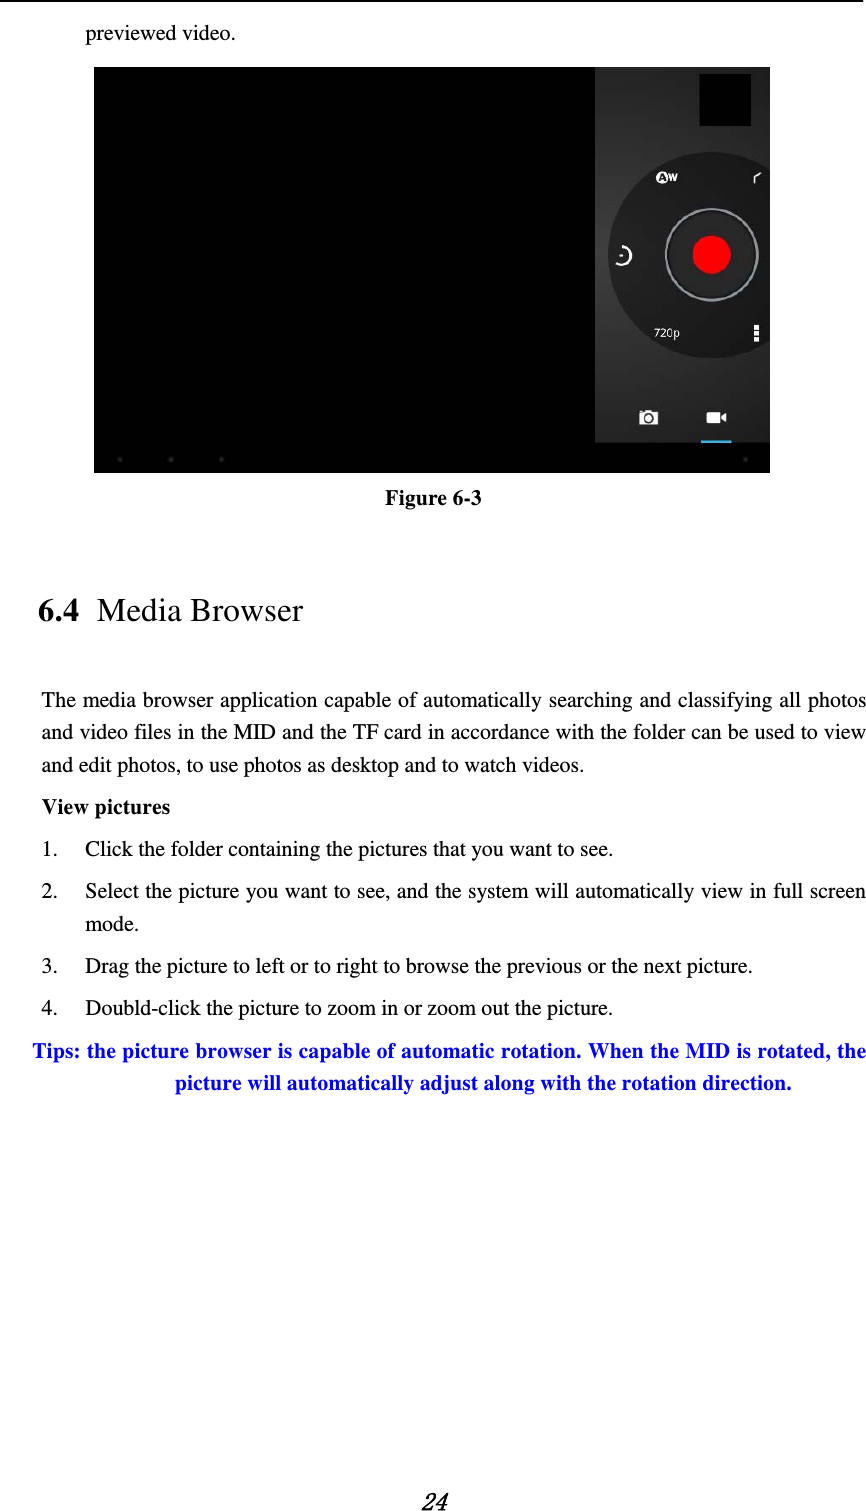    24 previewed video.    Figure 6-3 6.4 Media Browser The media browser application capable of automatically searching and classifying all photos and video files in the MID and the TF card in accordance with the folder can be used to view and edit photos, to use photos as desktop and to watch videos. View pictures 1. Click the folder containing the pictures that you want to see. 2. Select the picture you want to see, and the system will automatically view in full screen mode. 3. Drag the picture to left or to right to browse the previous or the next picture. 4. Doubld-click the picture to zoom in or zoom out the picture.  Tips: the picture browser is capable of automatic rotation. When the MID is rotated, the picture will automatically adjust along with the rotation direction. 